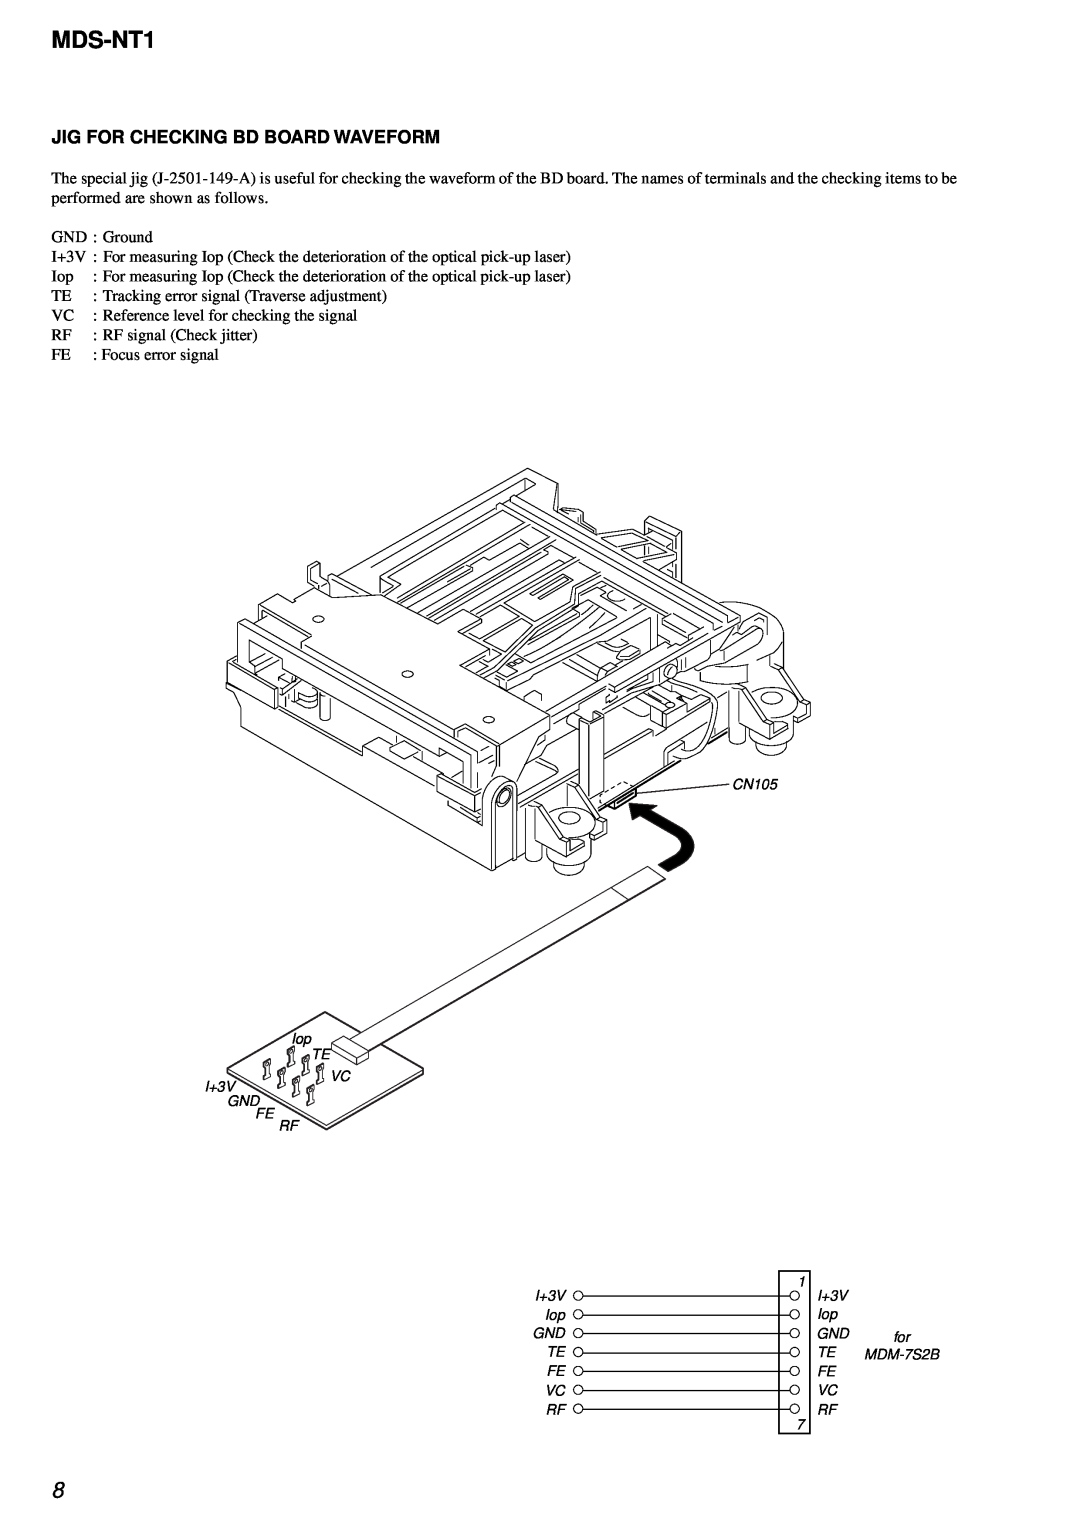 Sony MDS-NT1 service manual Jig For Checking Bd Board Waveform 